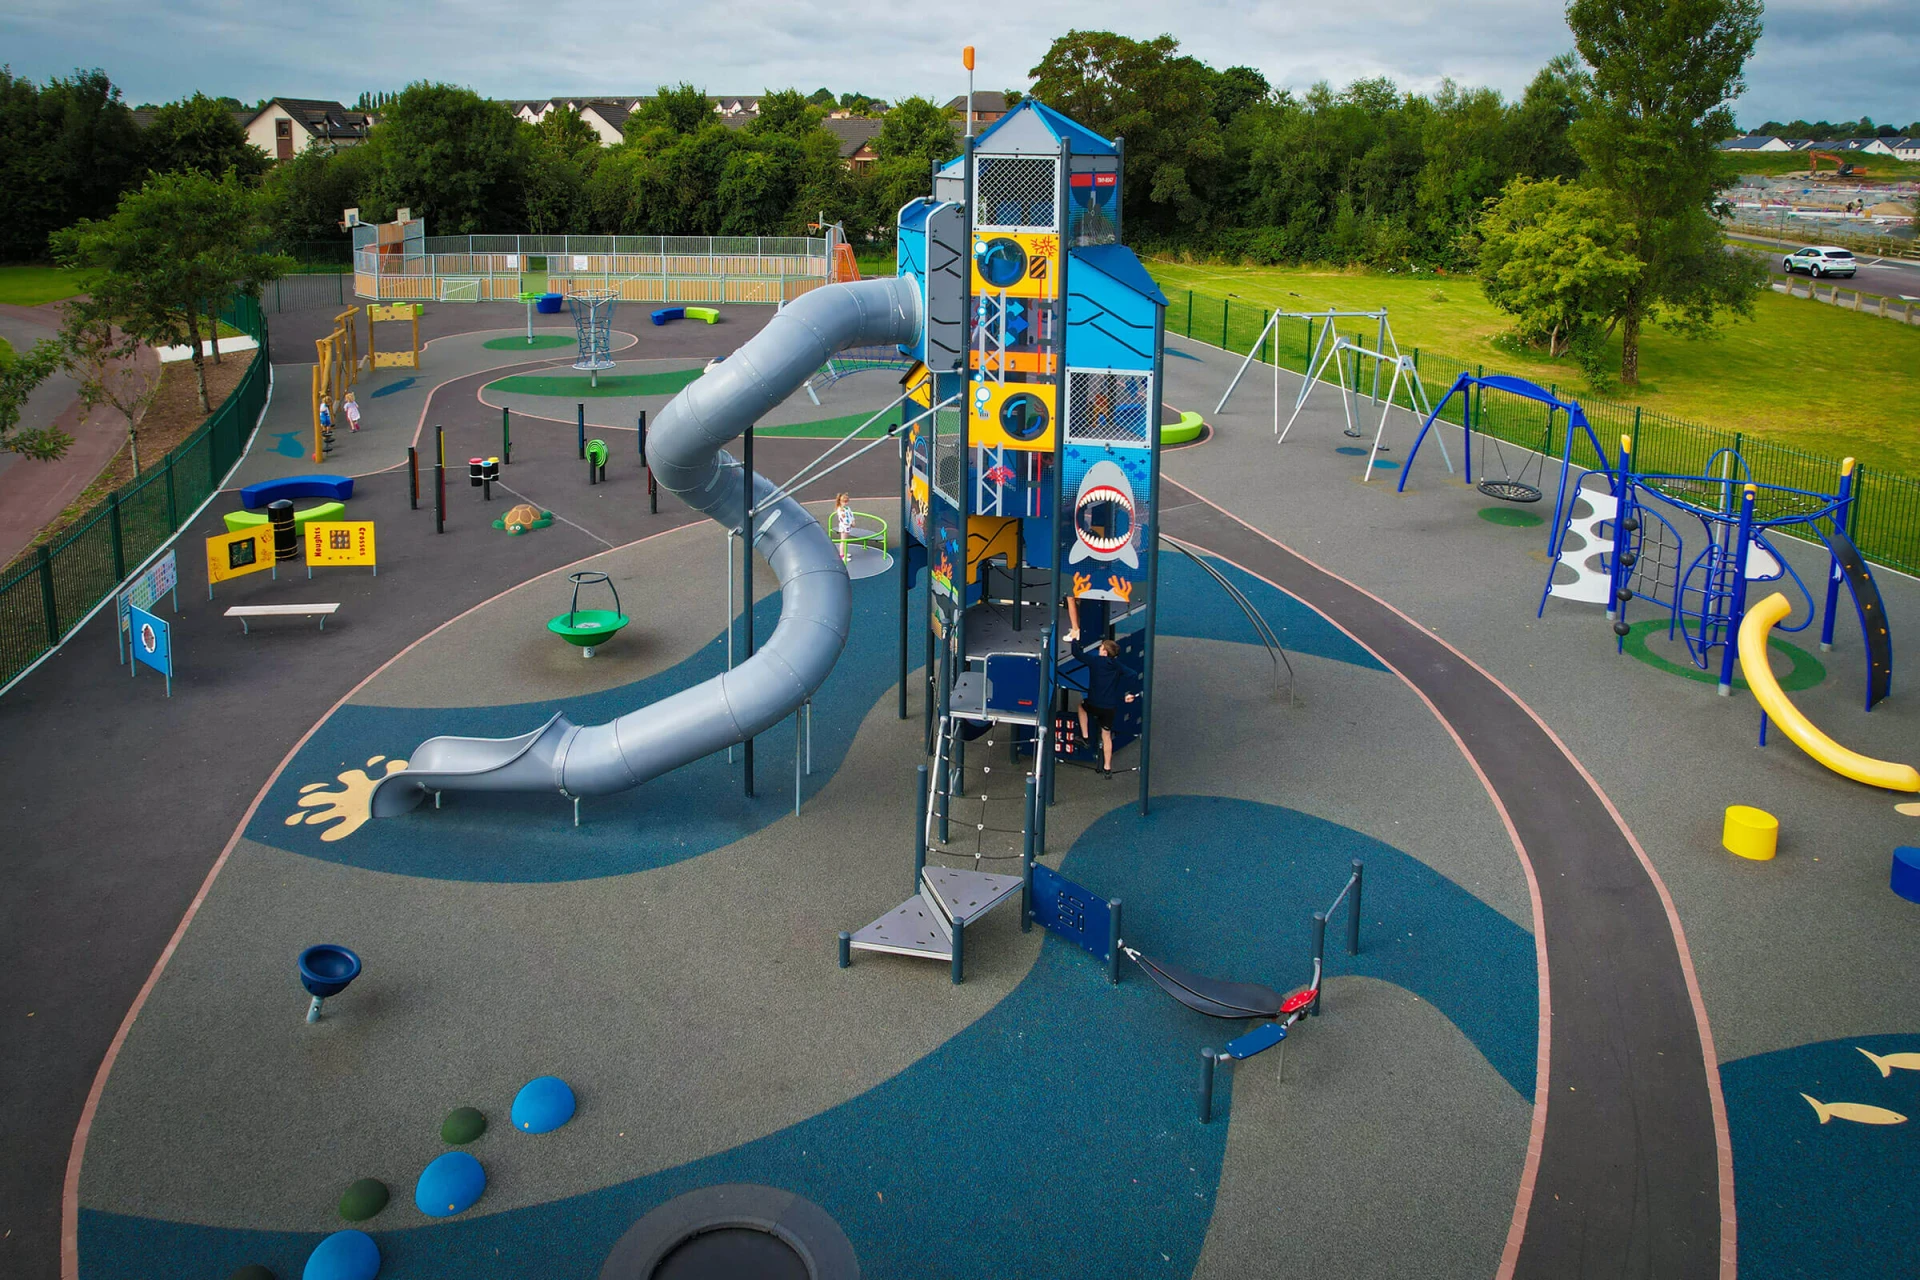 A children's playground with a GIANT playtower with 9 metre slide 